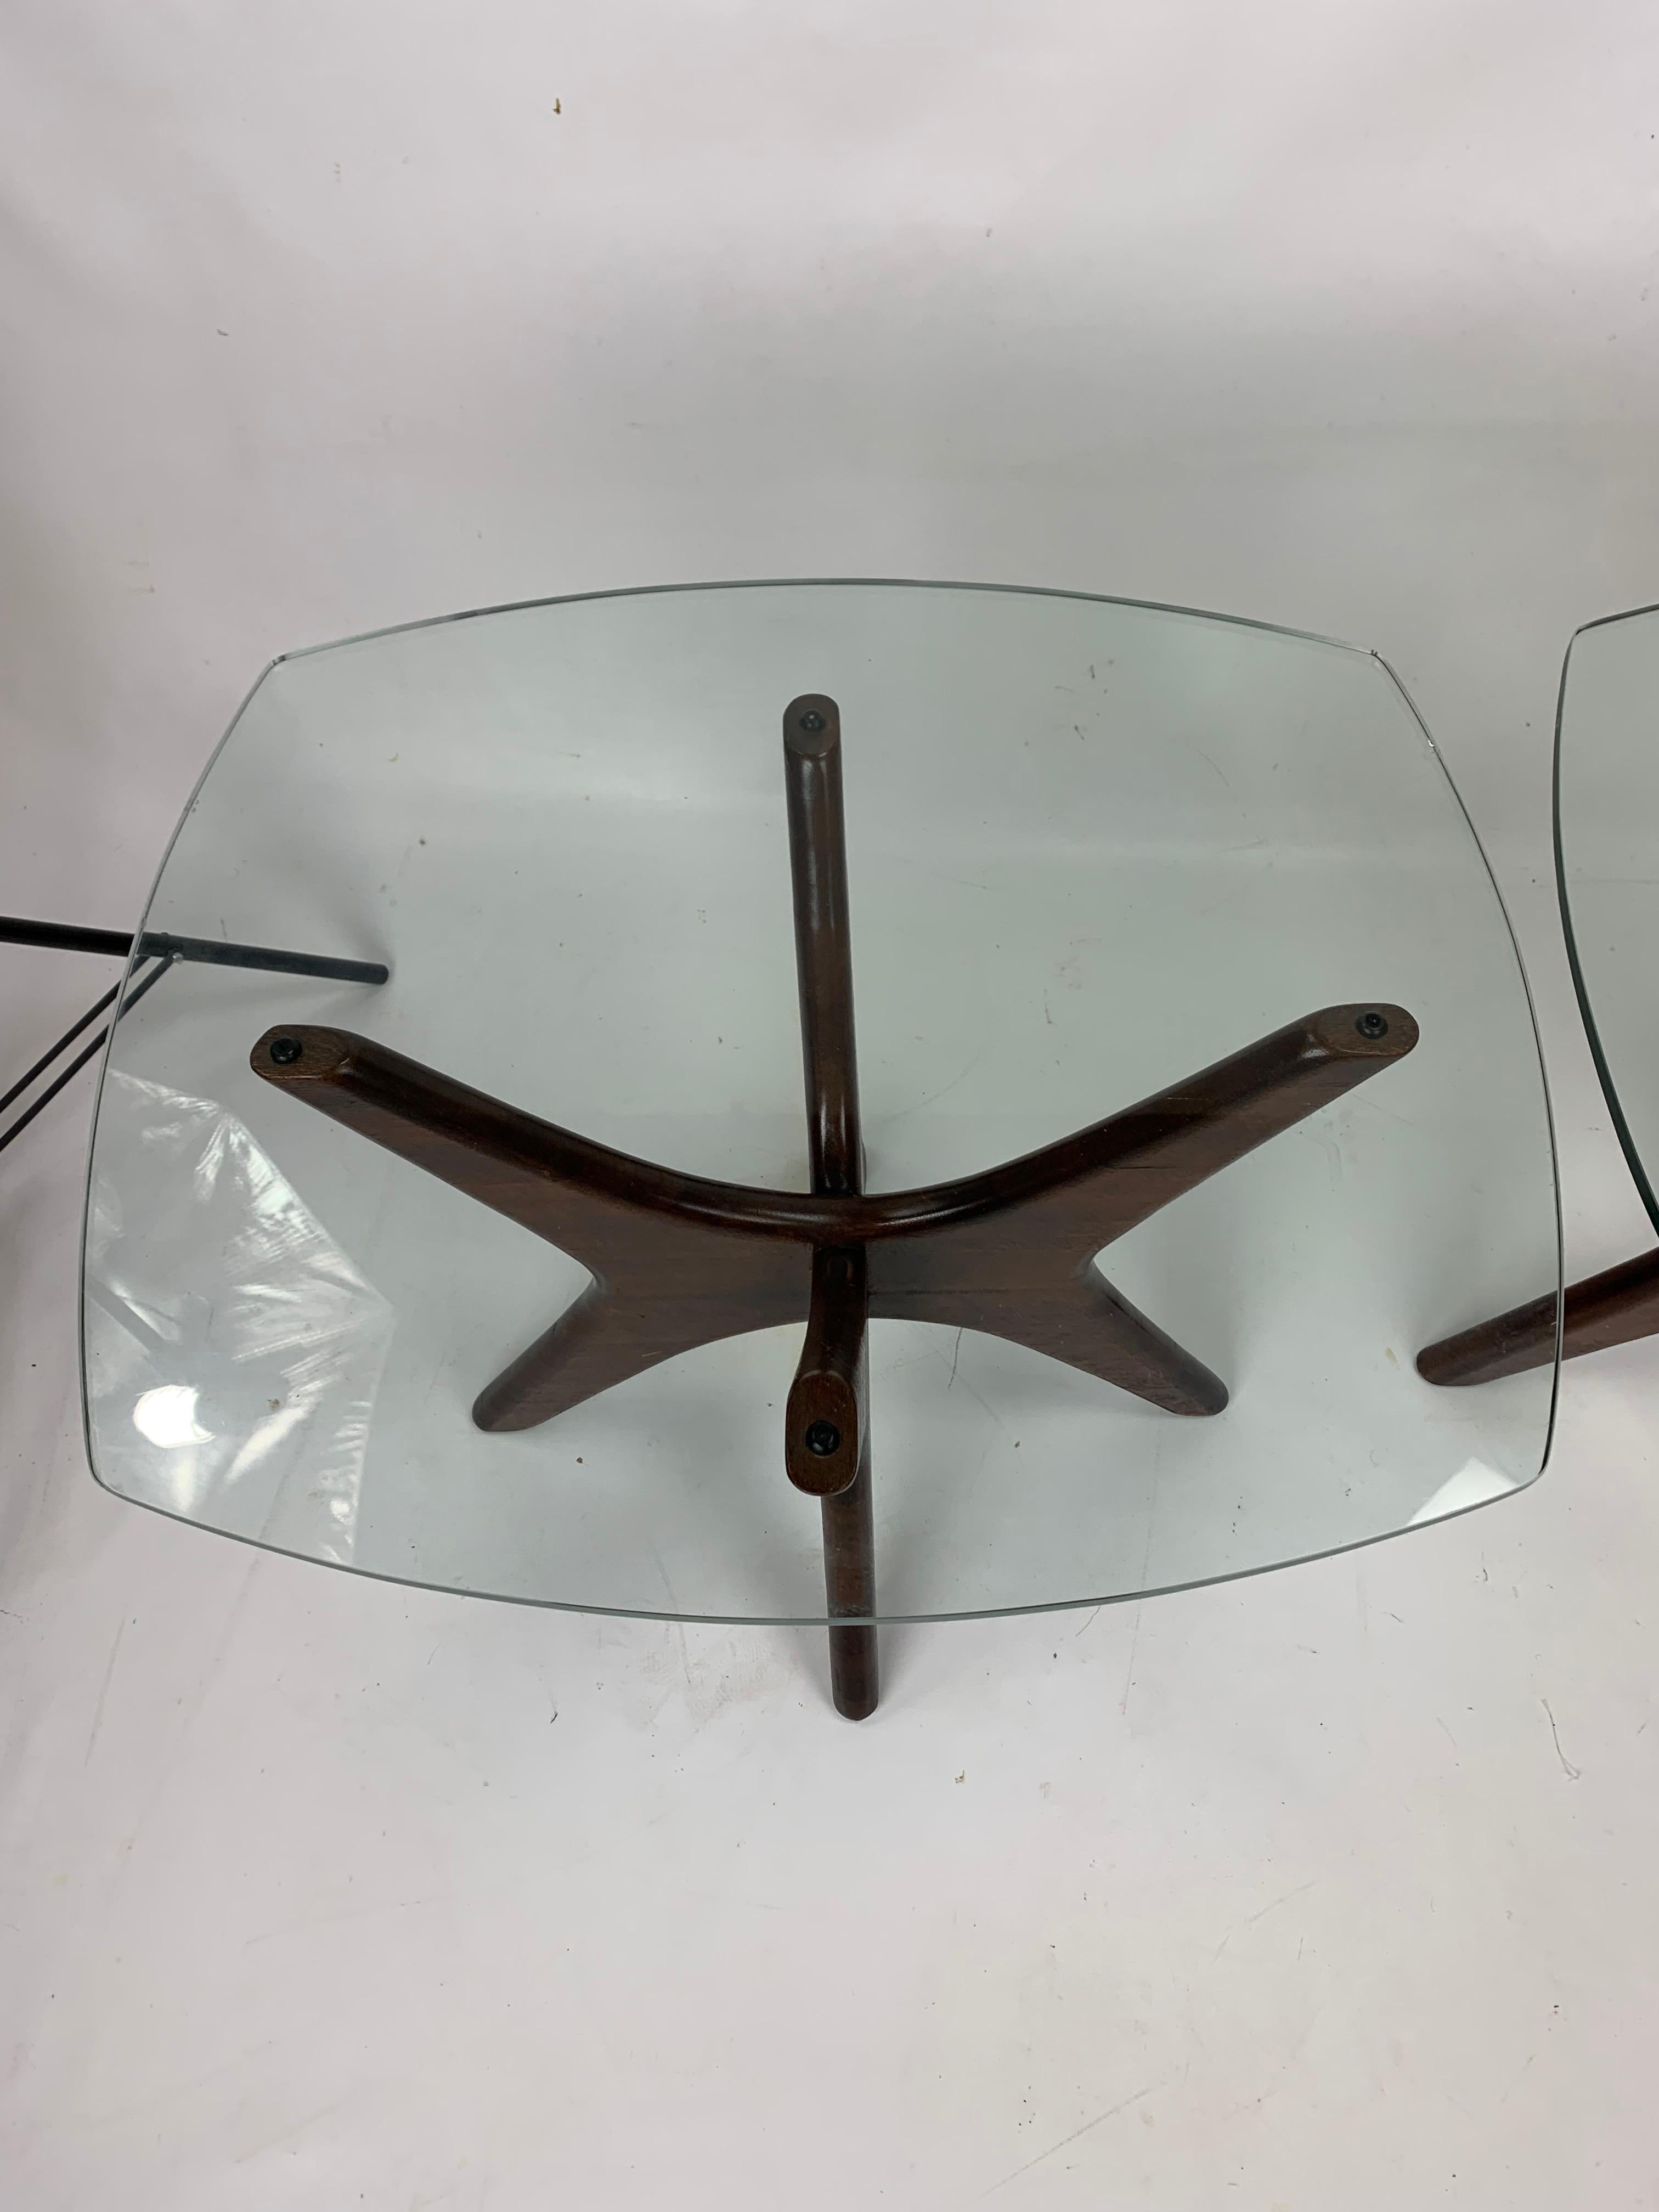 American Mid-Century Modern Adrian Pearsall Jacks End Tables, a Pair